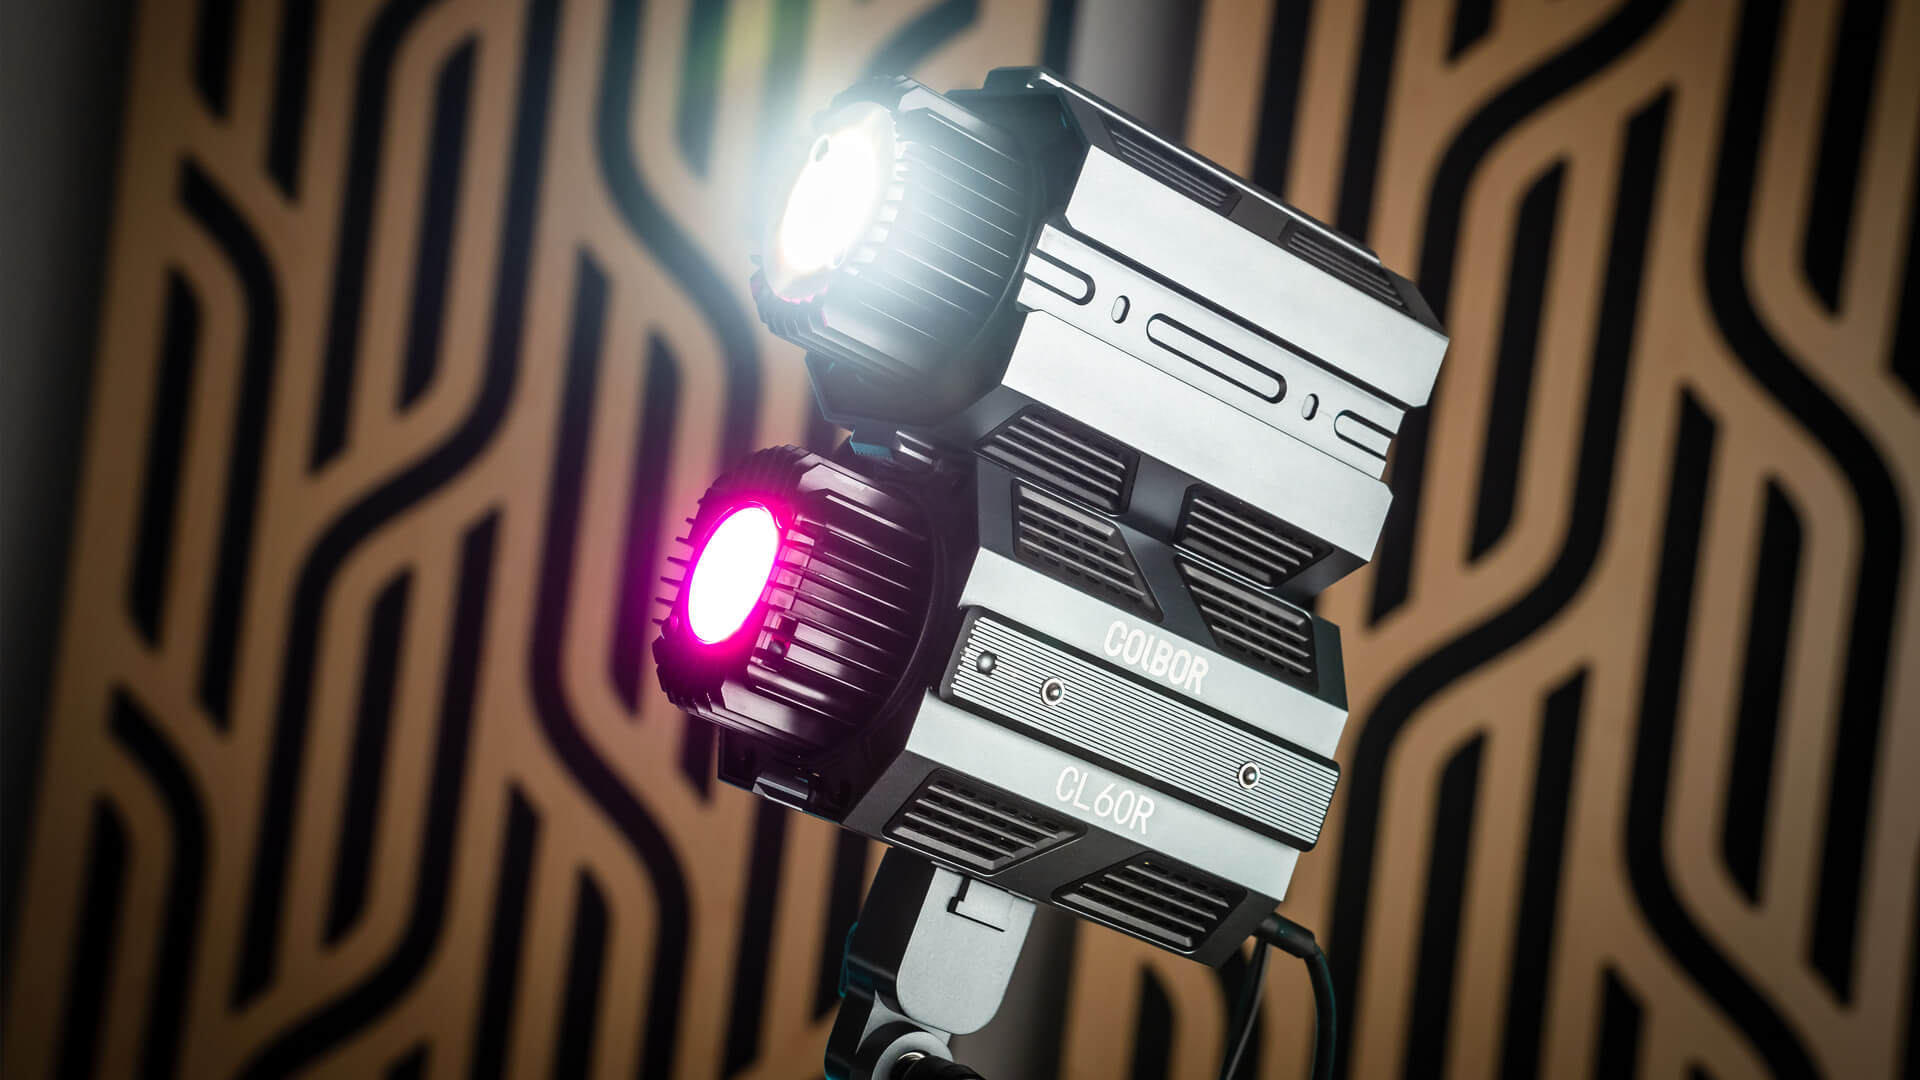 Beginners’ guide to product videography lighting: Why, what, how